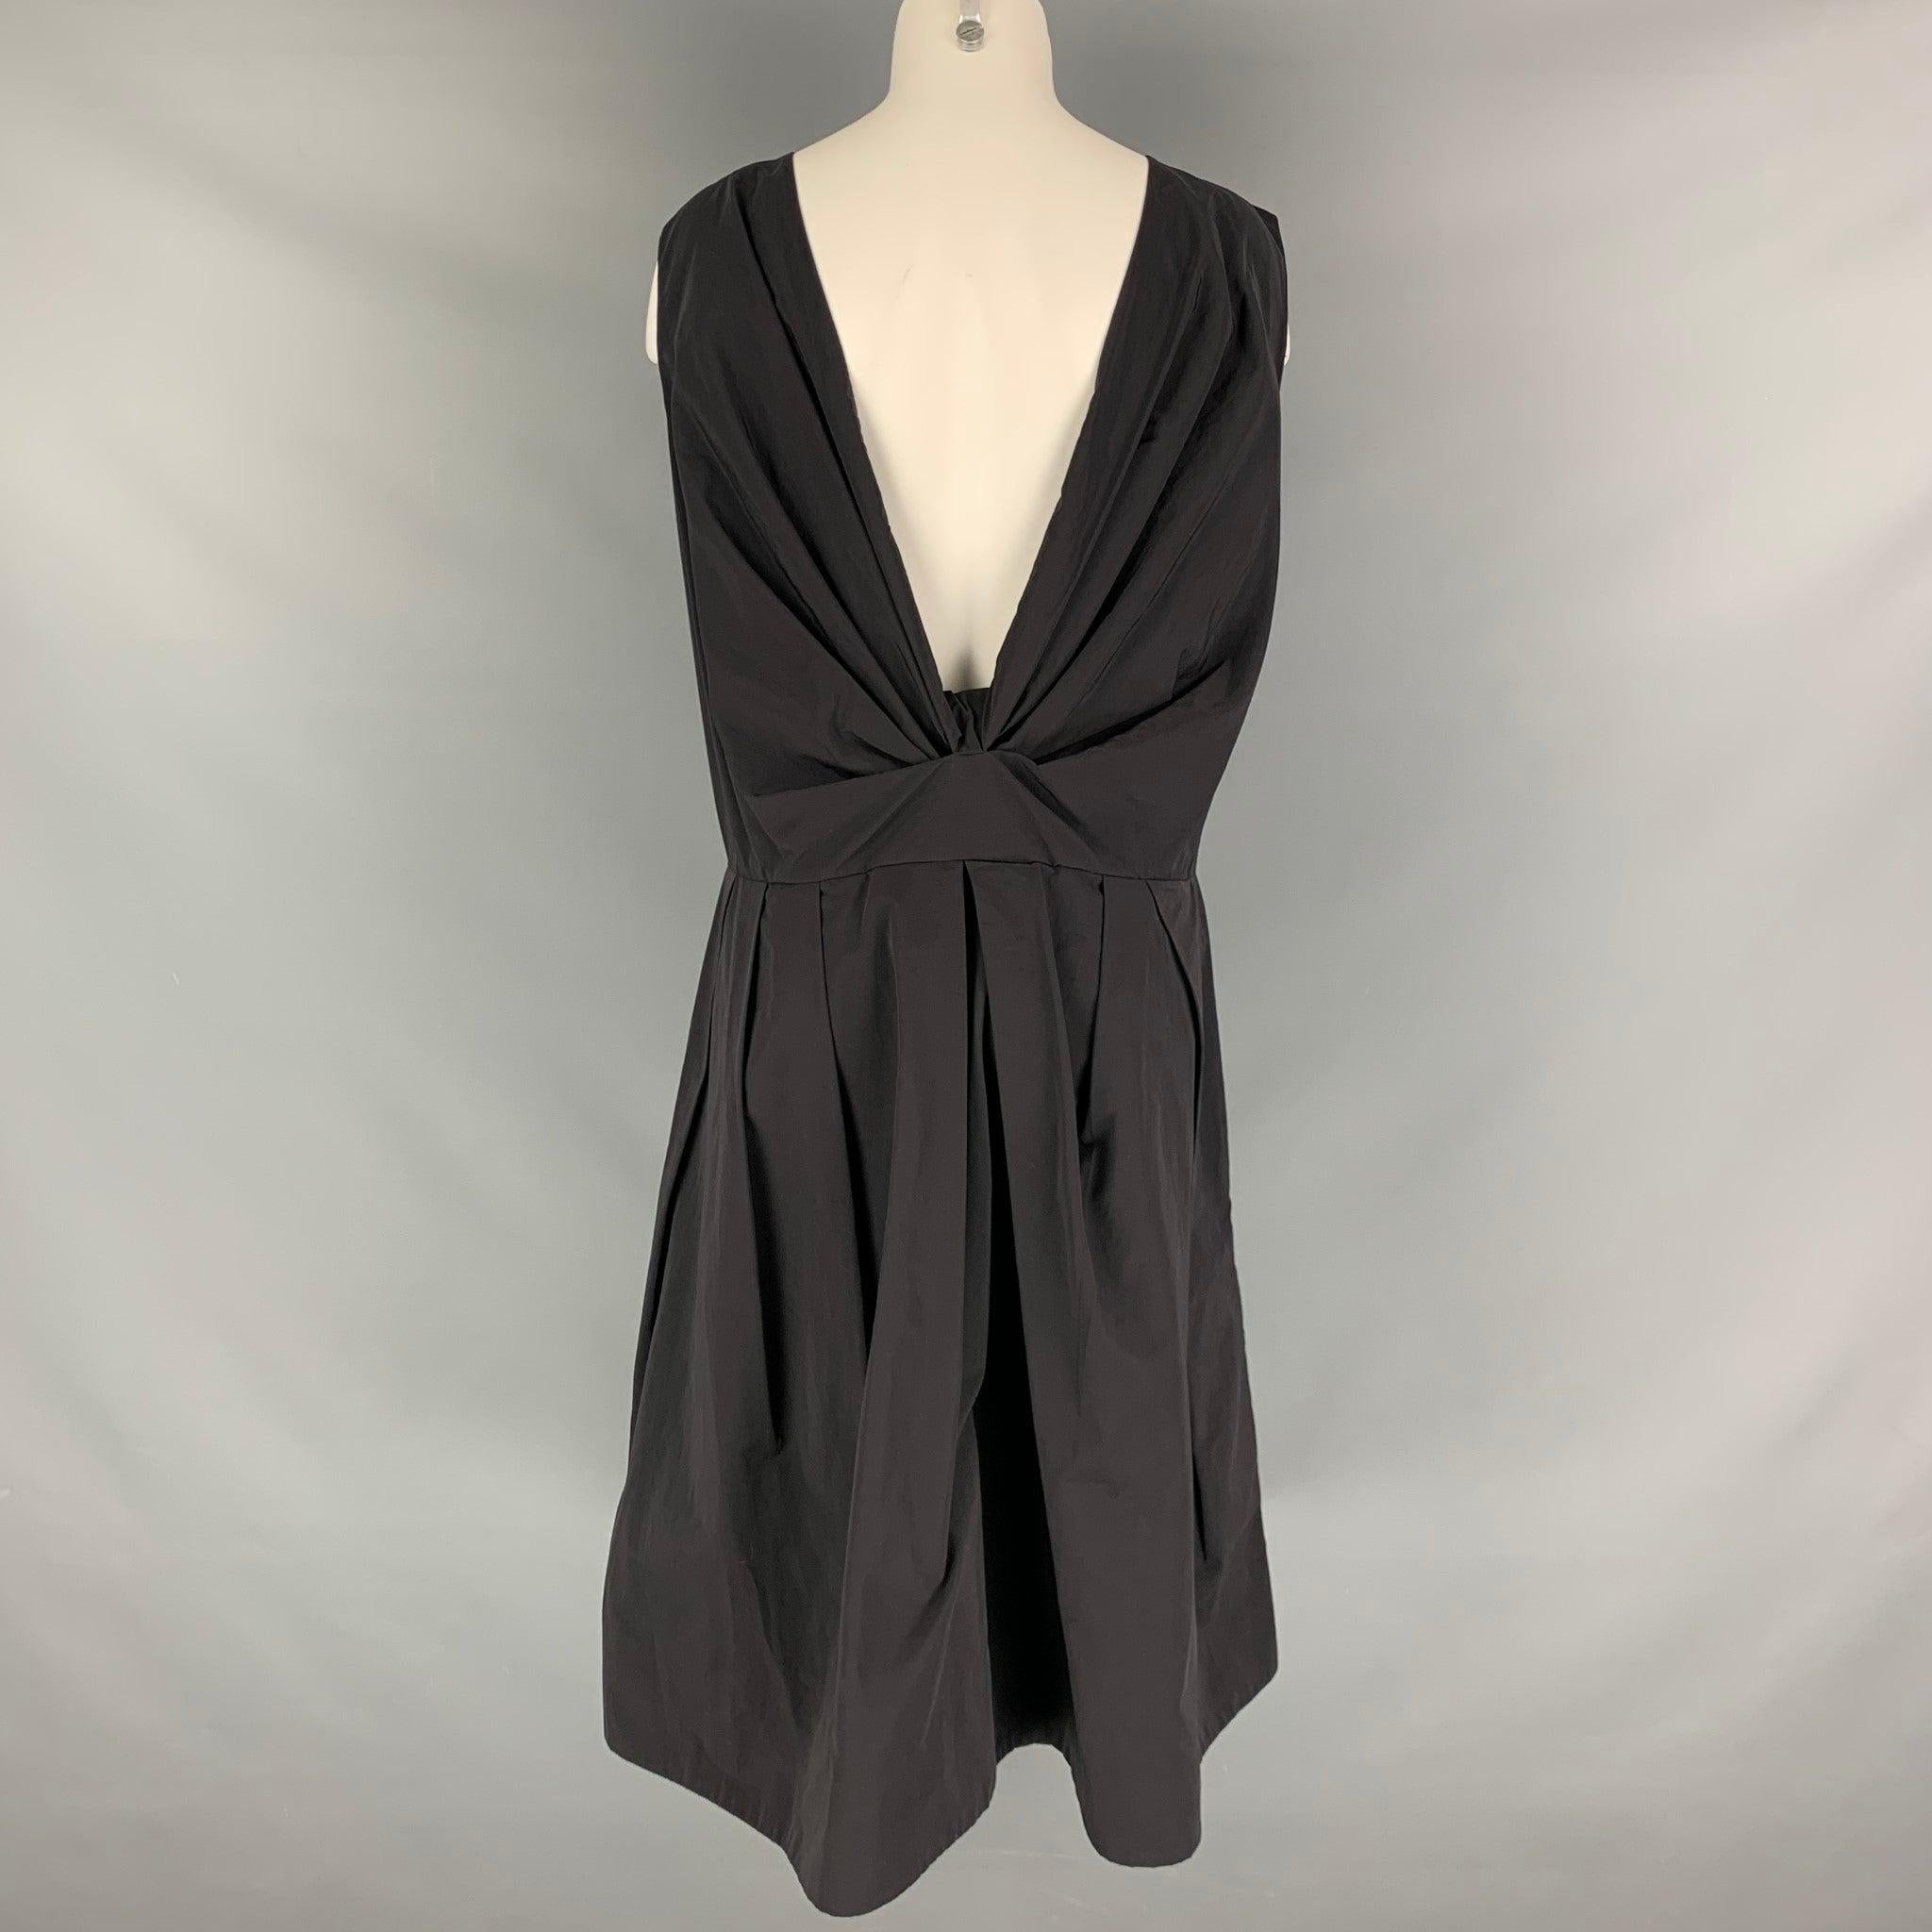 MARNI Size 6 Black Cotton Nylon Sleeveless Dress In Excellent Condition For Sale In San Francisco, CA